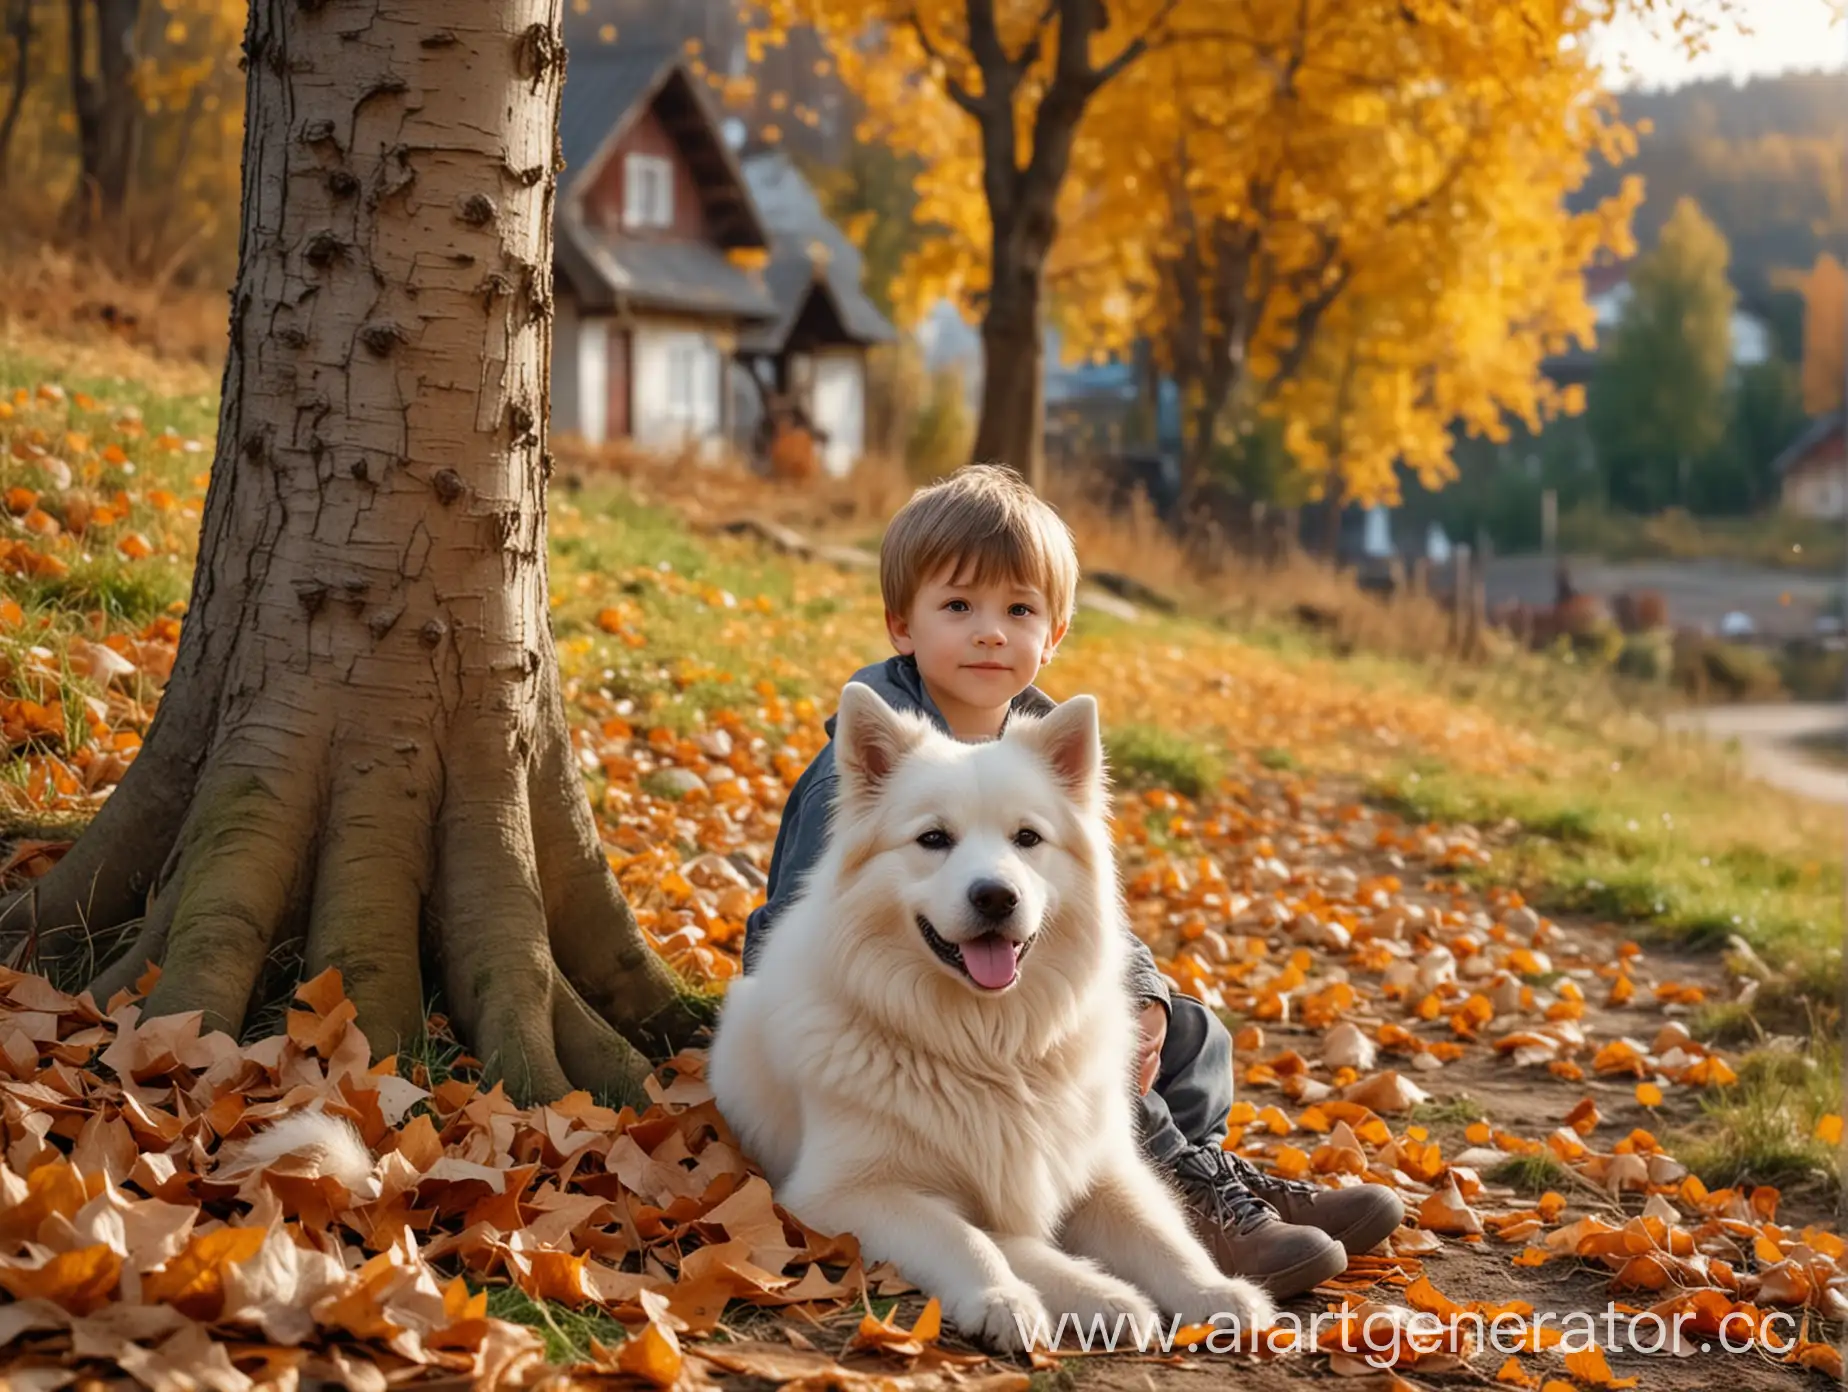 Child-and-Dog-Enjoy-Autumn-Scenery-in-Village-Forest